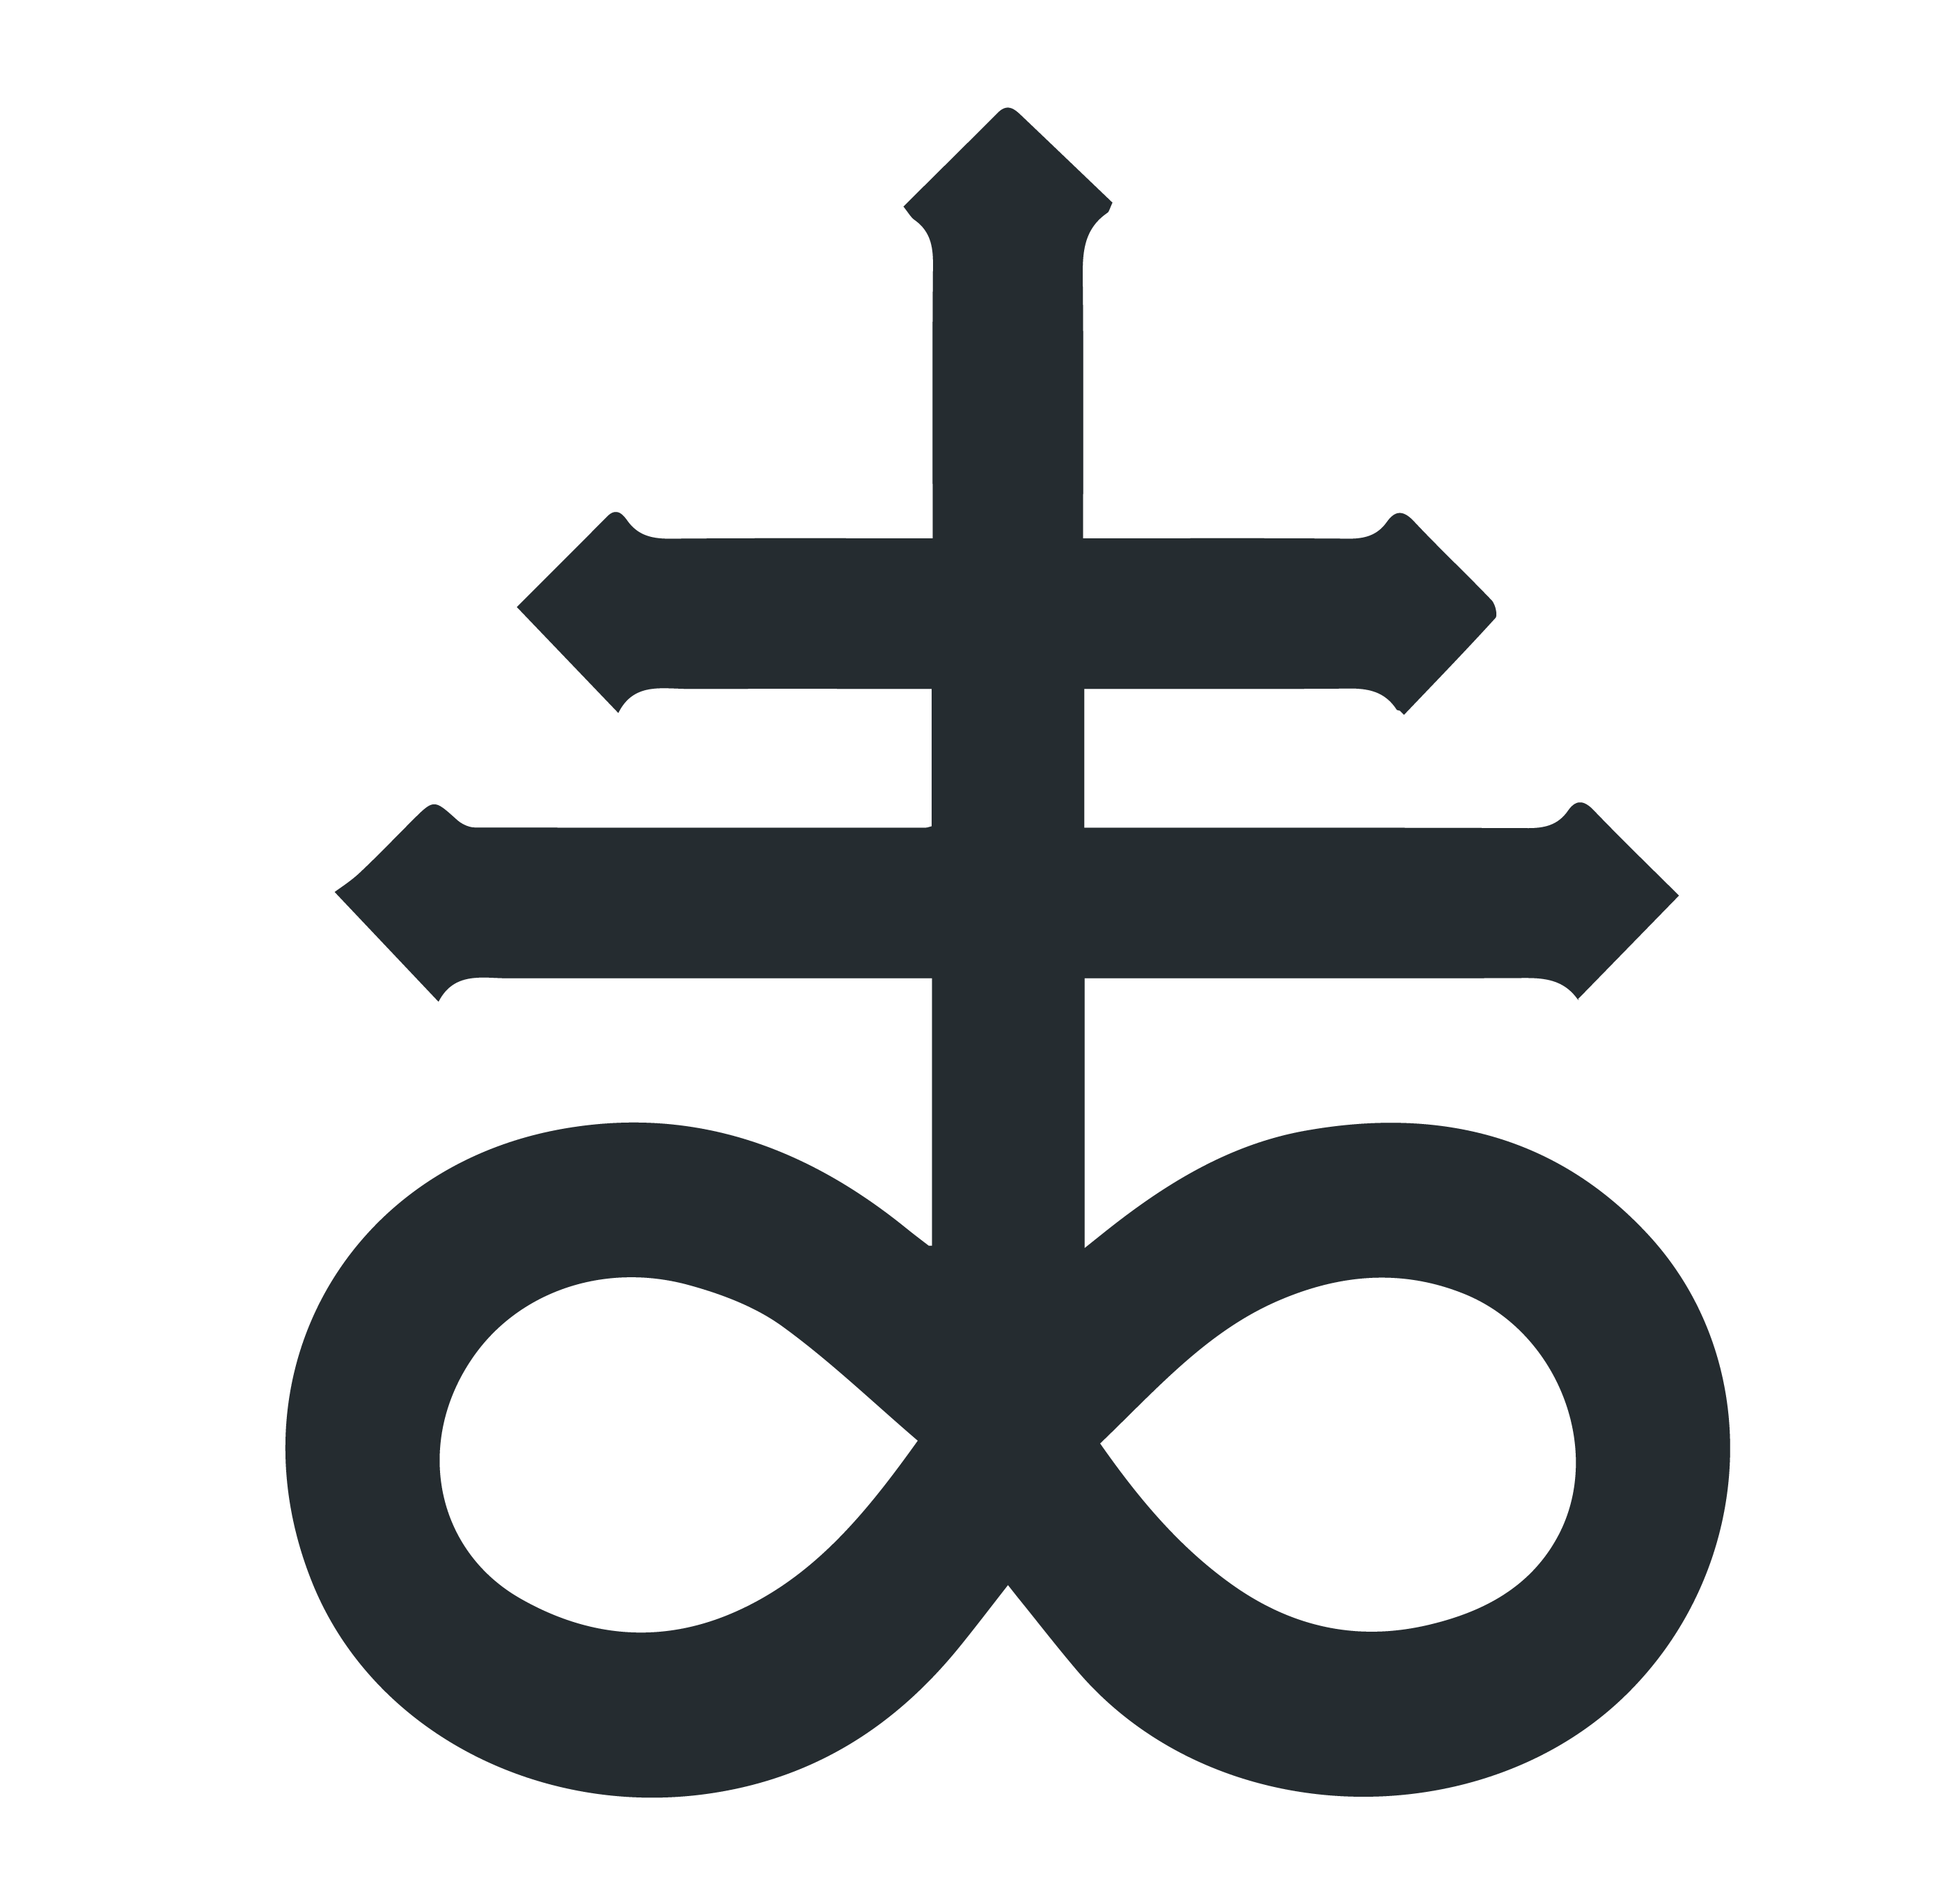 Upside Down W Logo - The Leviathan Cross (Satan's Cross) Symbol and Its Meaning